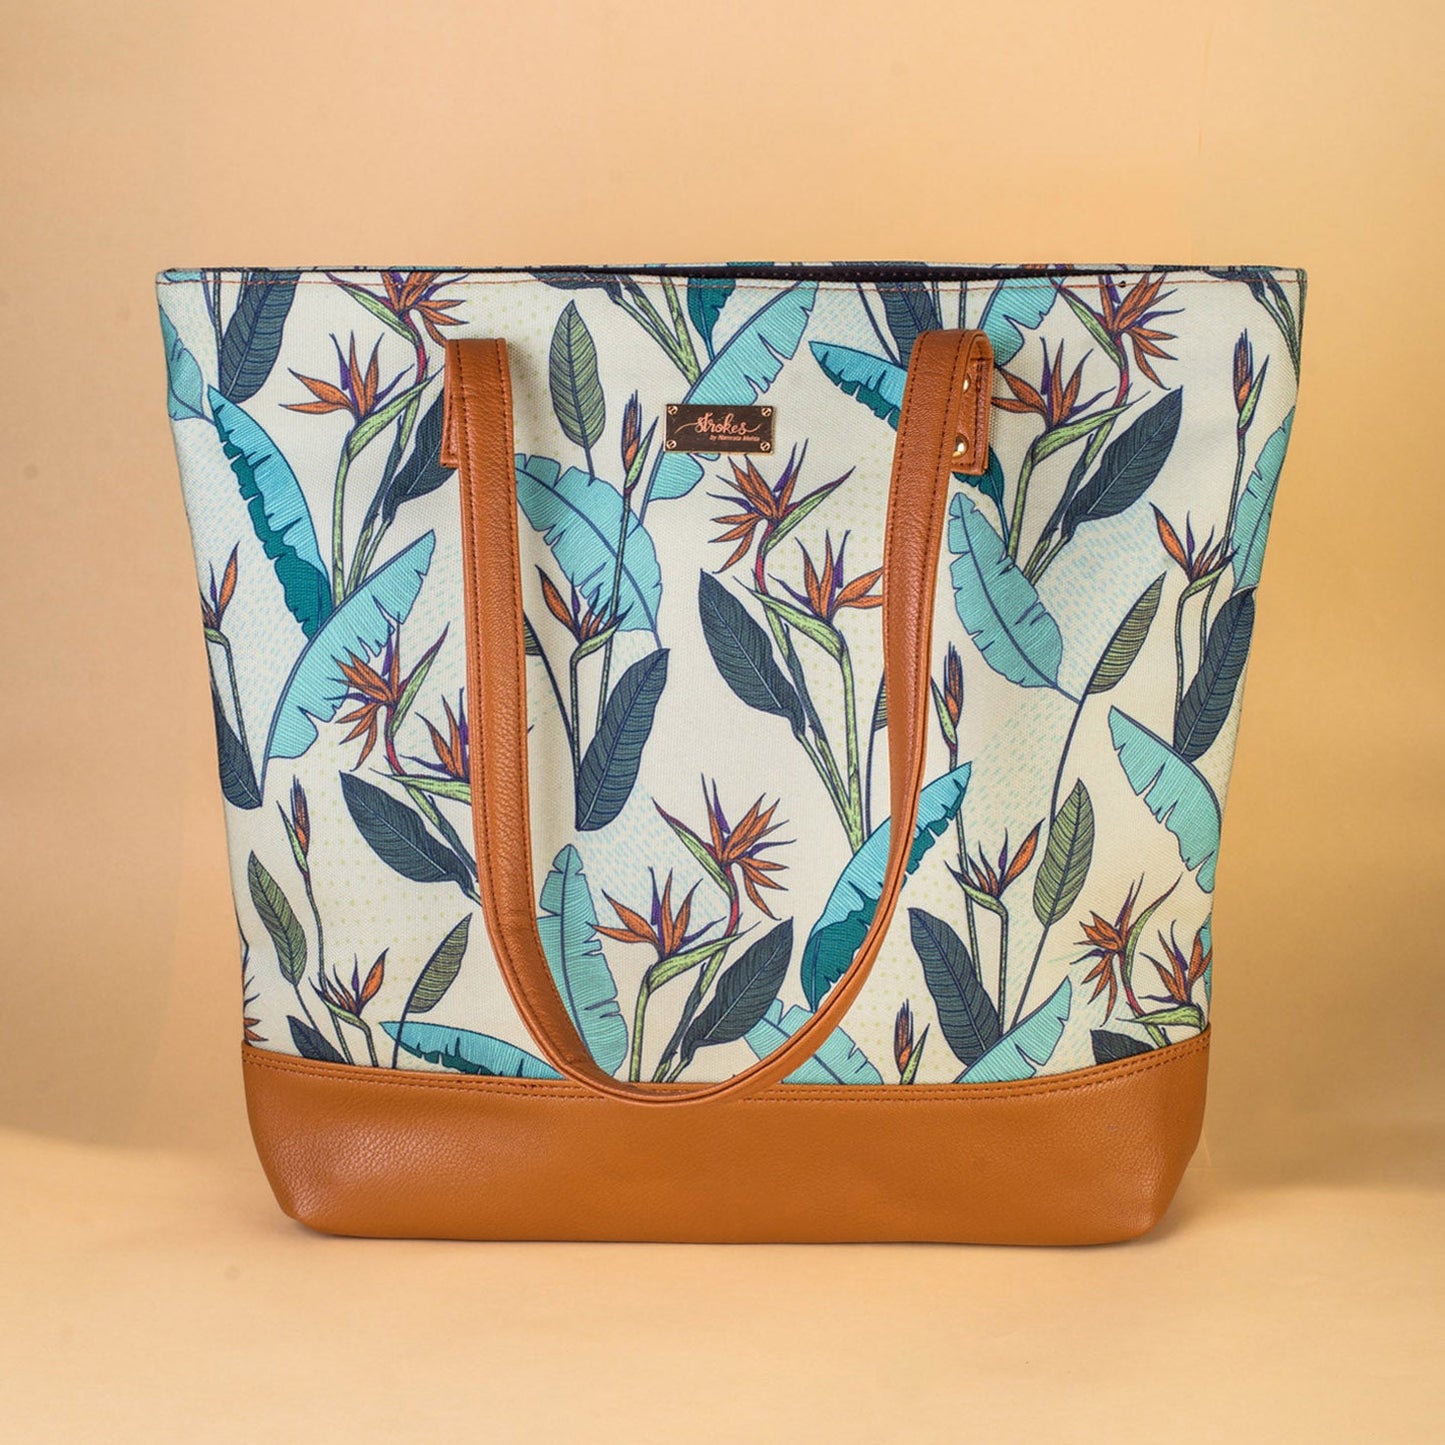 Birds of Paradise Tote Bag